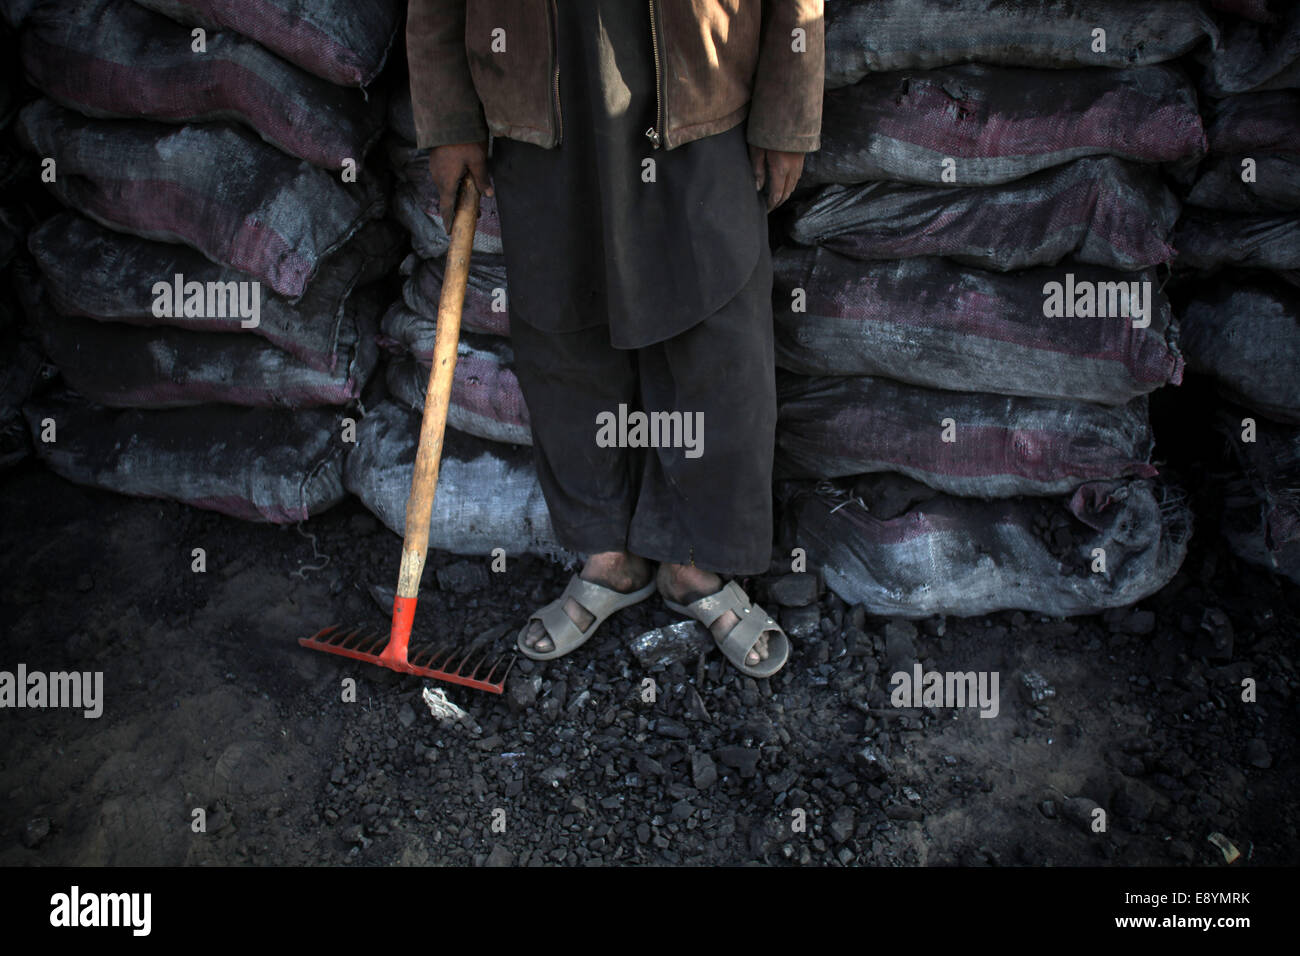 Kabul, Afghanistan. 16th Oct, 2014. A laborer stands to have a rest at a coal market in Kabul, Afghanistan, Oct. 16, 2014. Afghan people are preparing fuel for the upcoming winter. © Ahmad Massoud/Xinhua/Alamy Live News Stock Photo